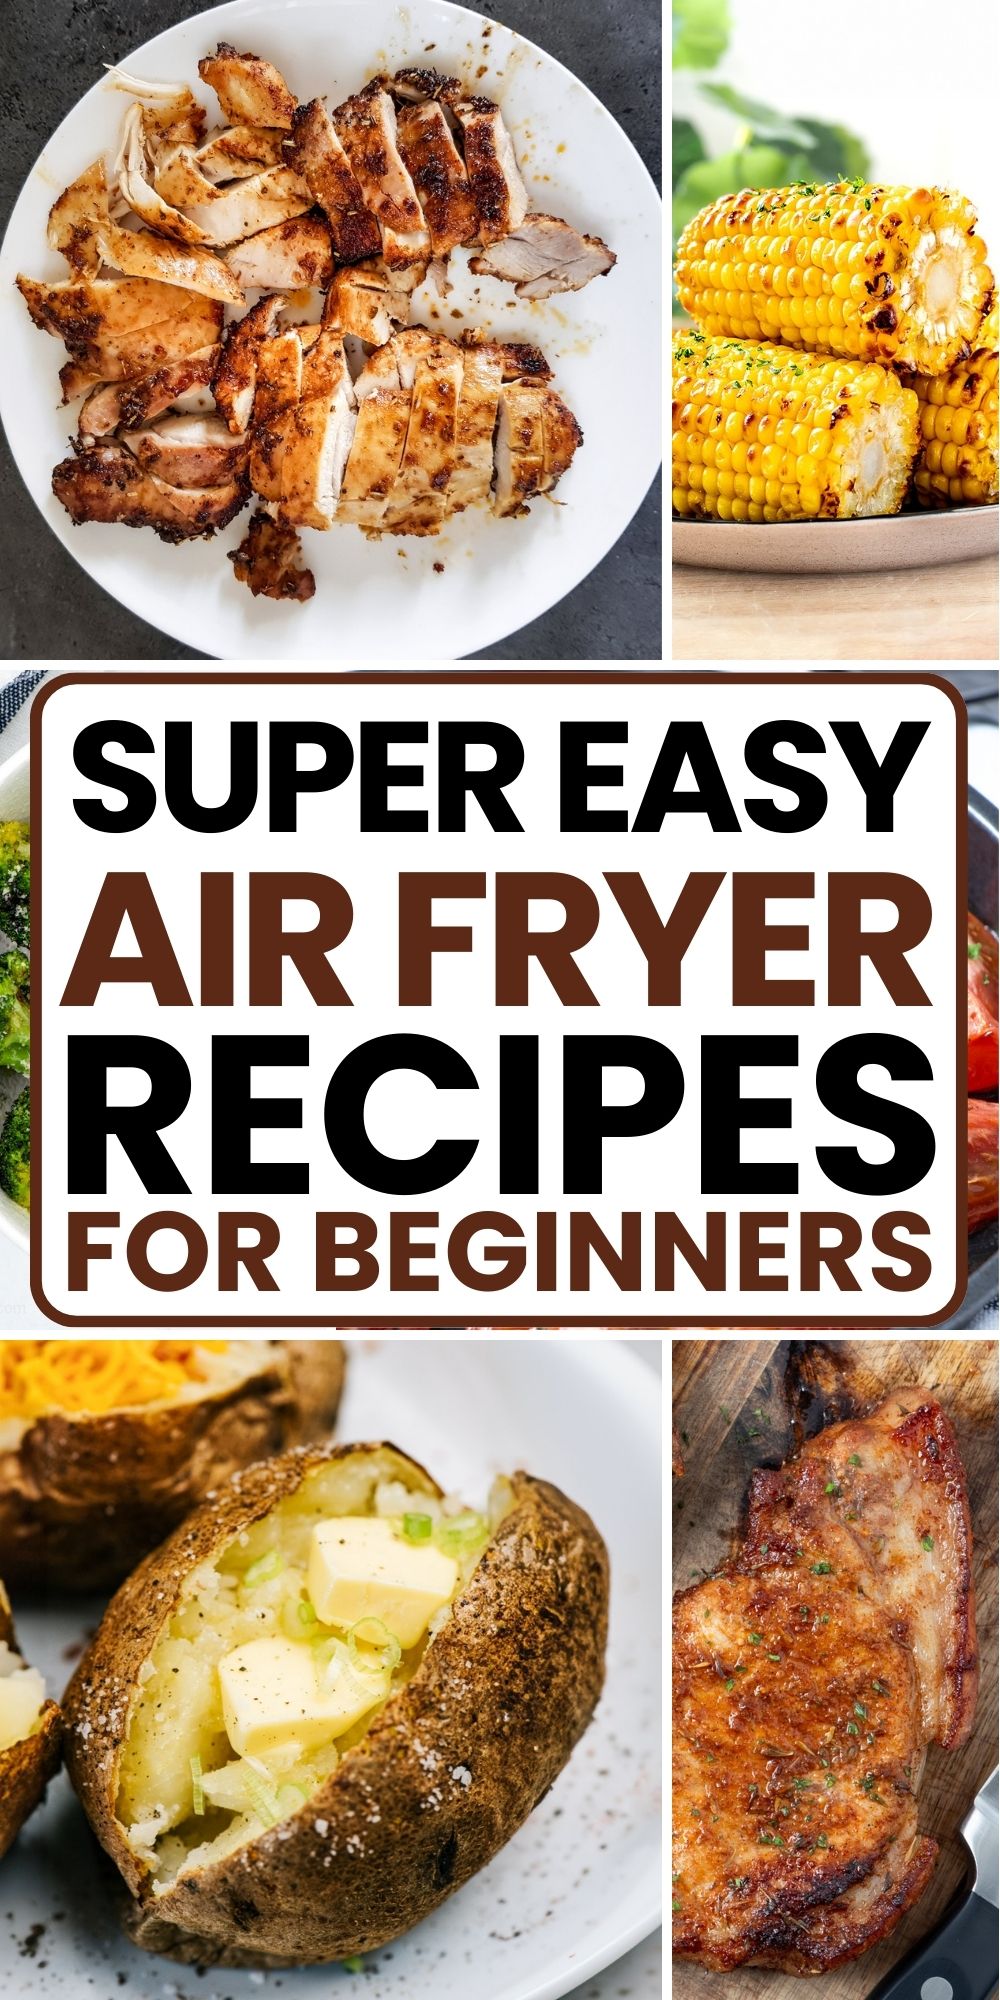 Photos of air fryer foods with text overlay: Easy air fryer recipes for beginners.